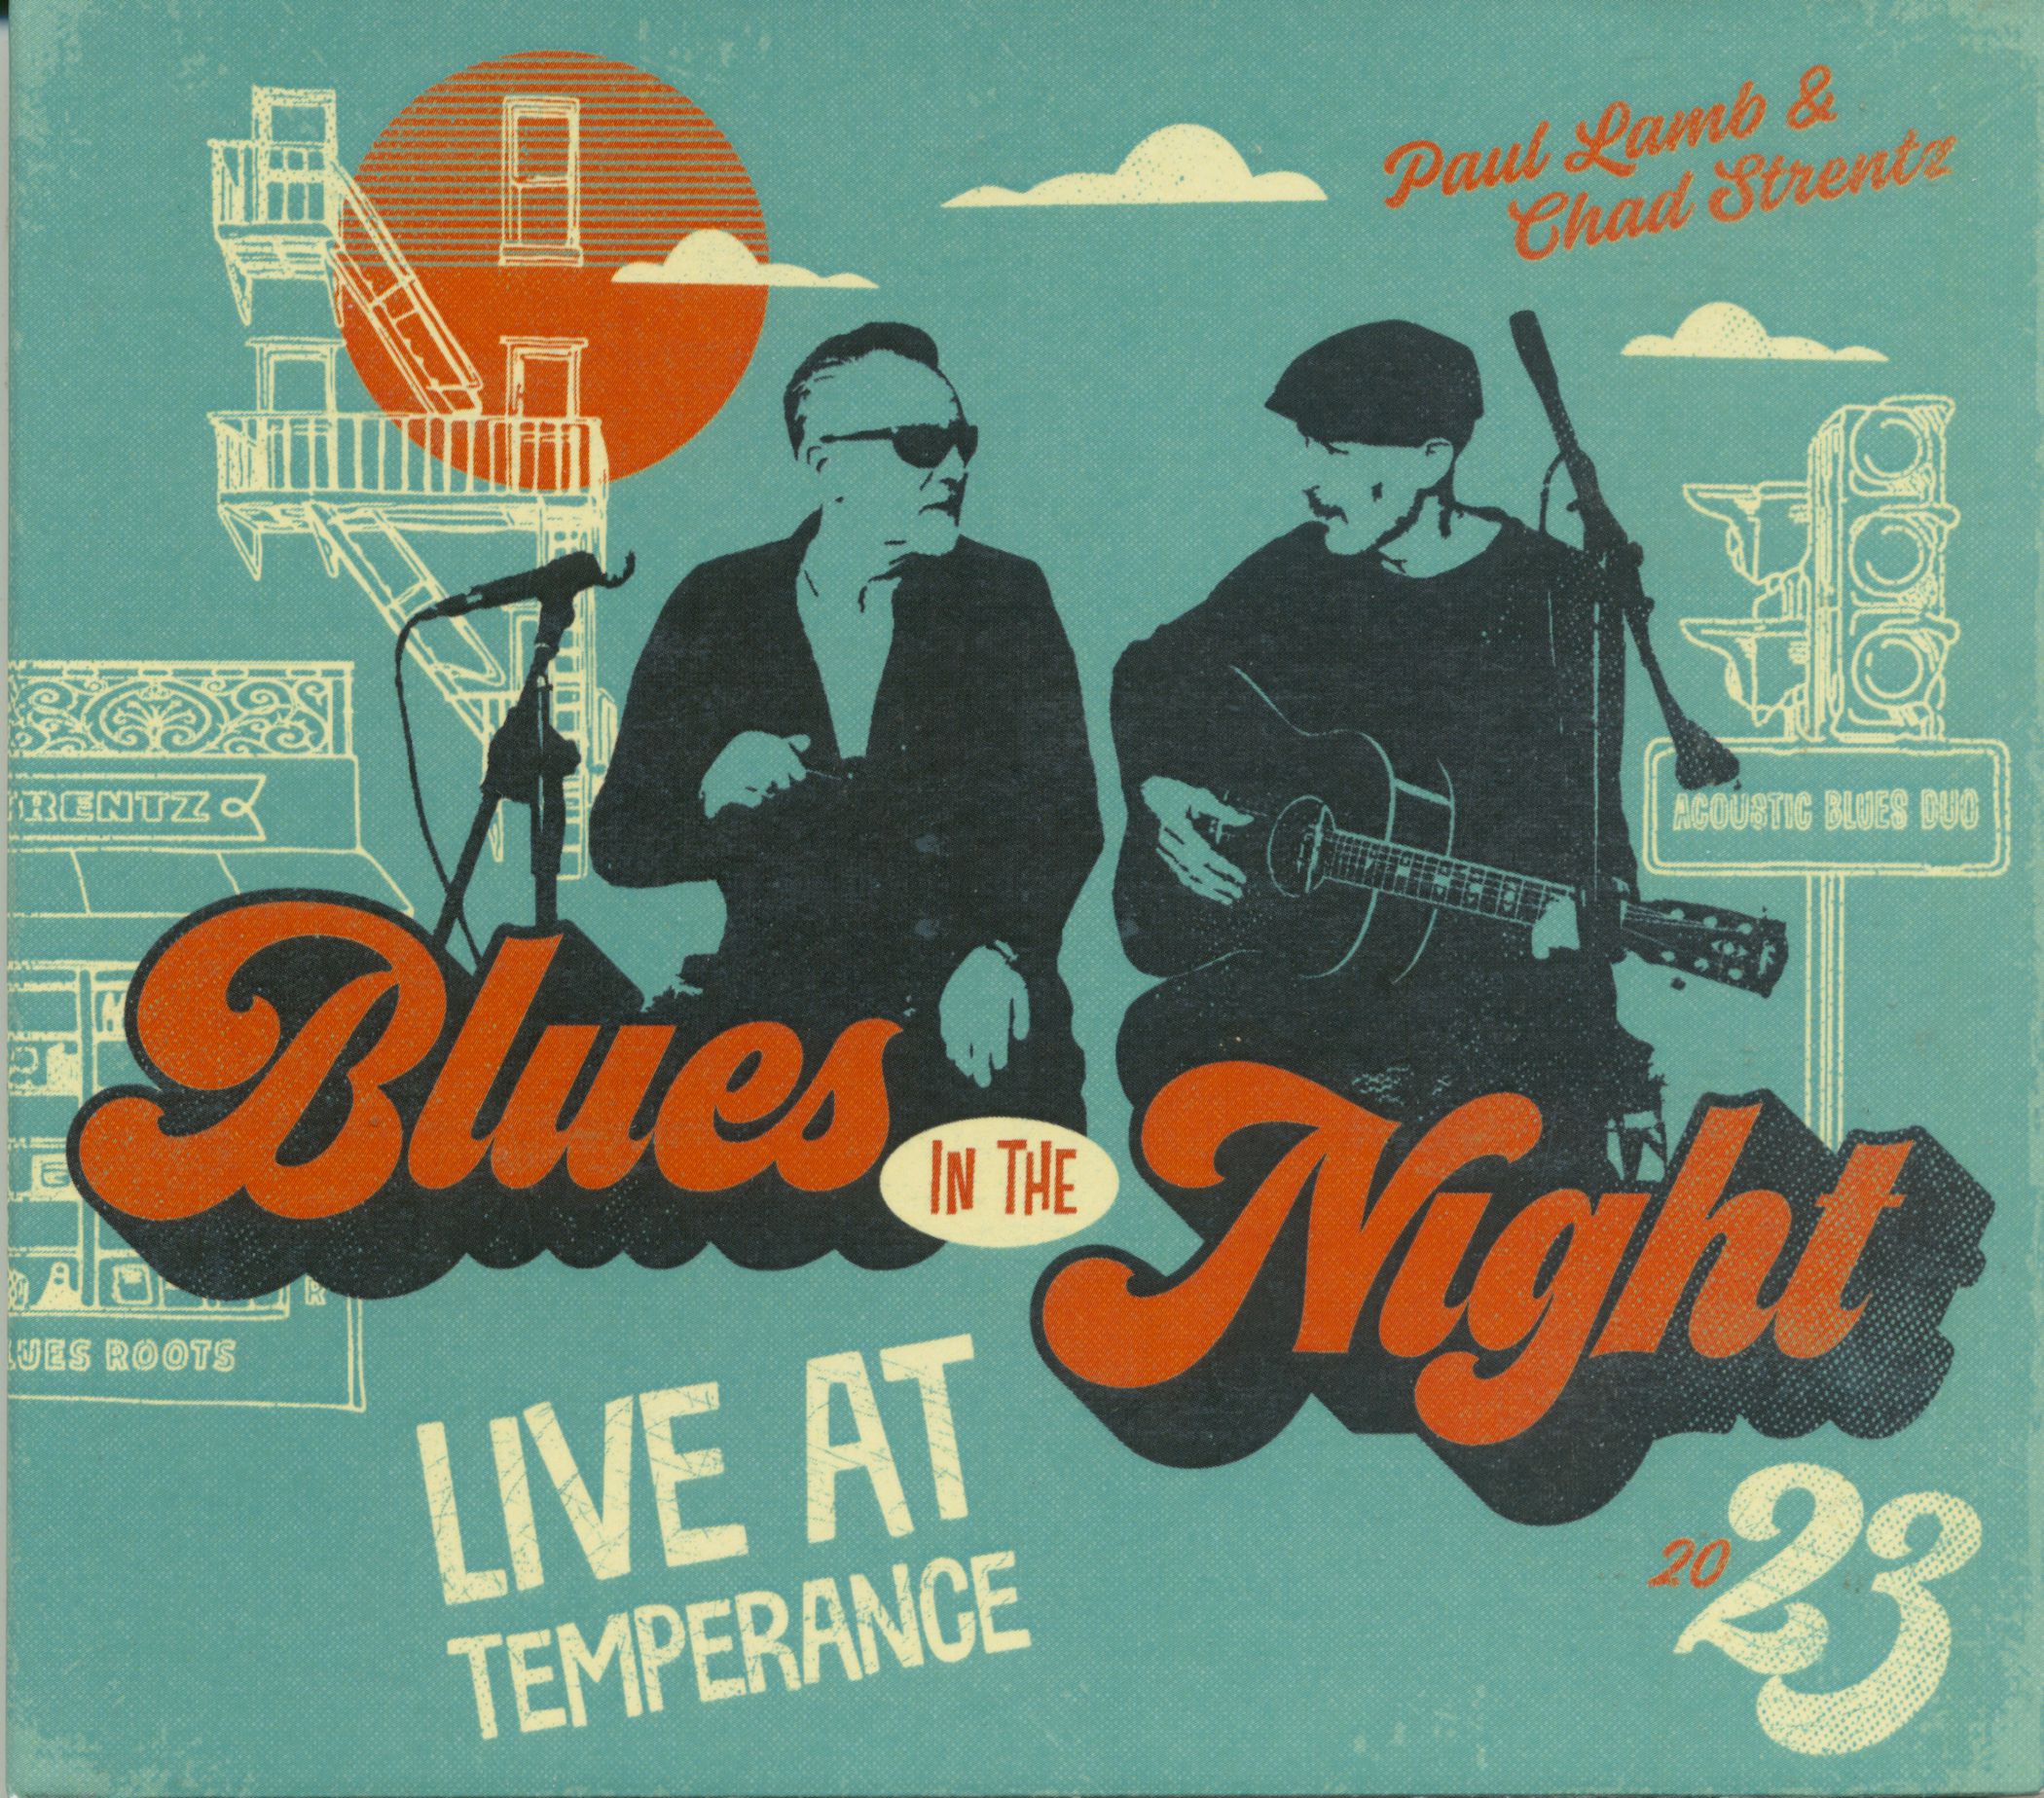 Paul Lamb & Chad Strentz – Blues In The Night – Live At Temperance